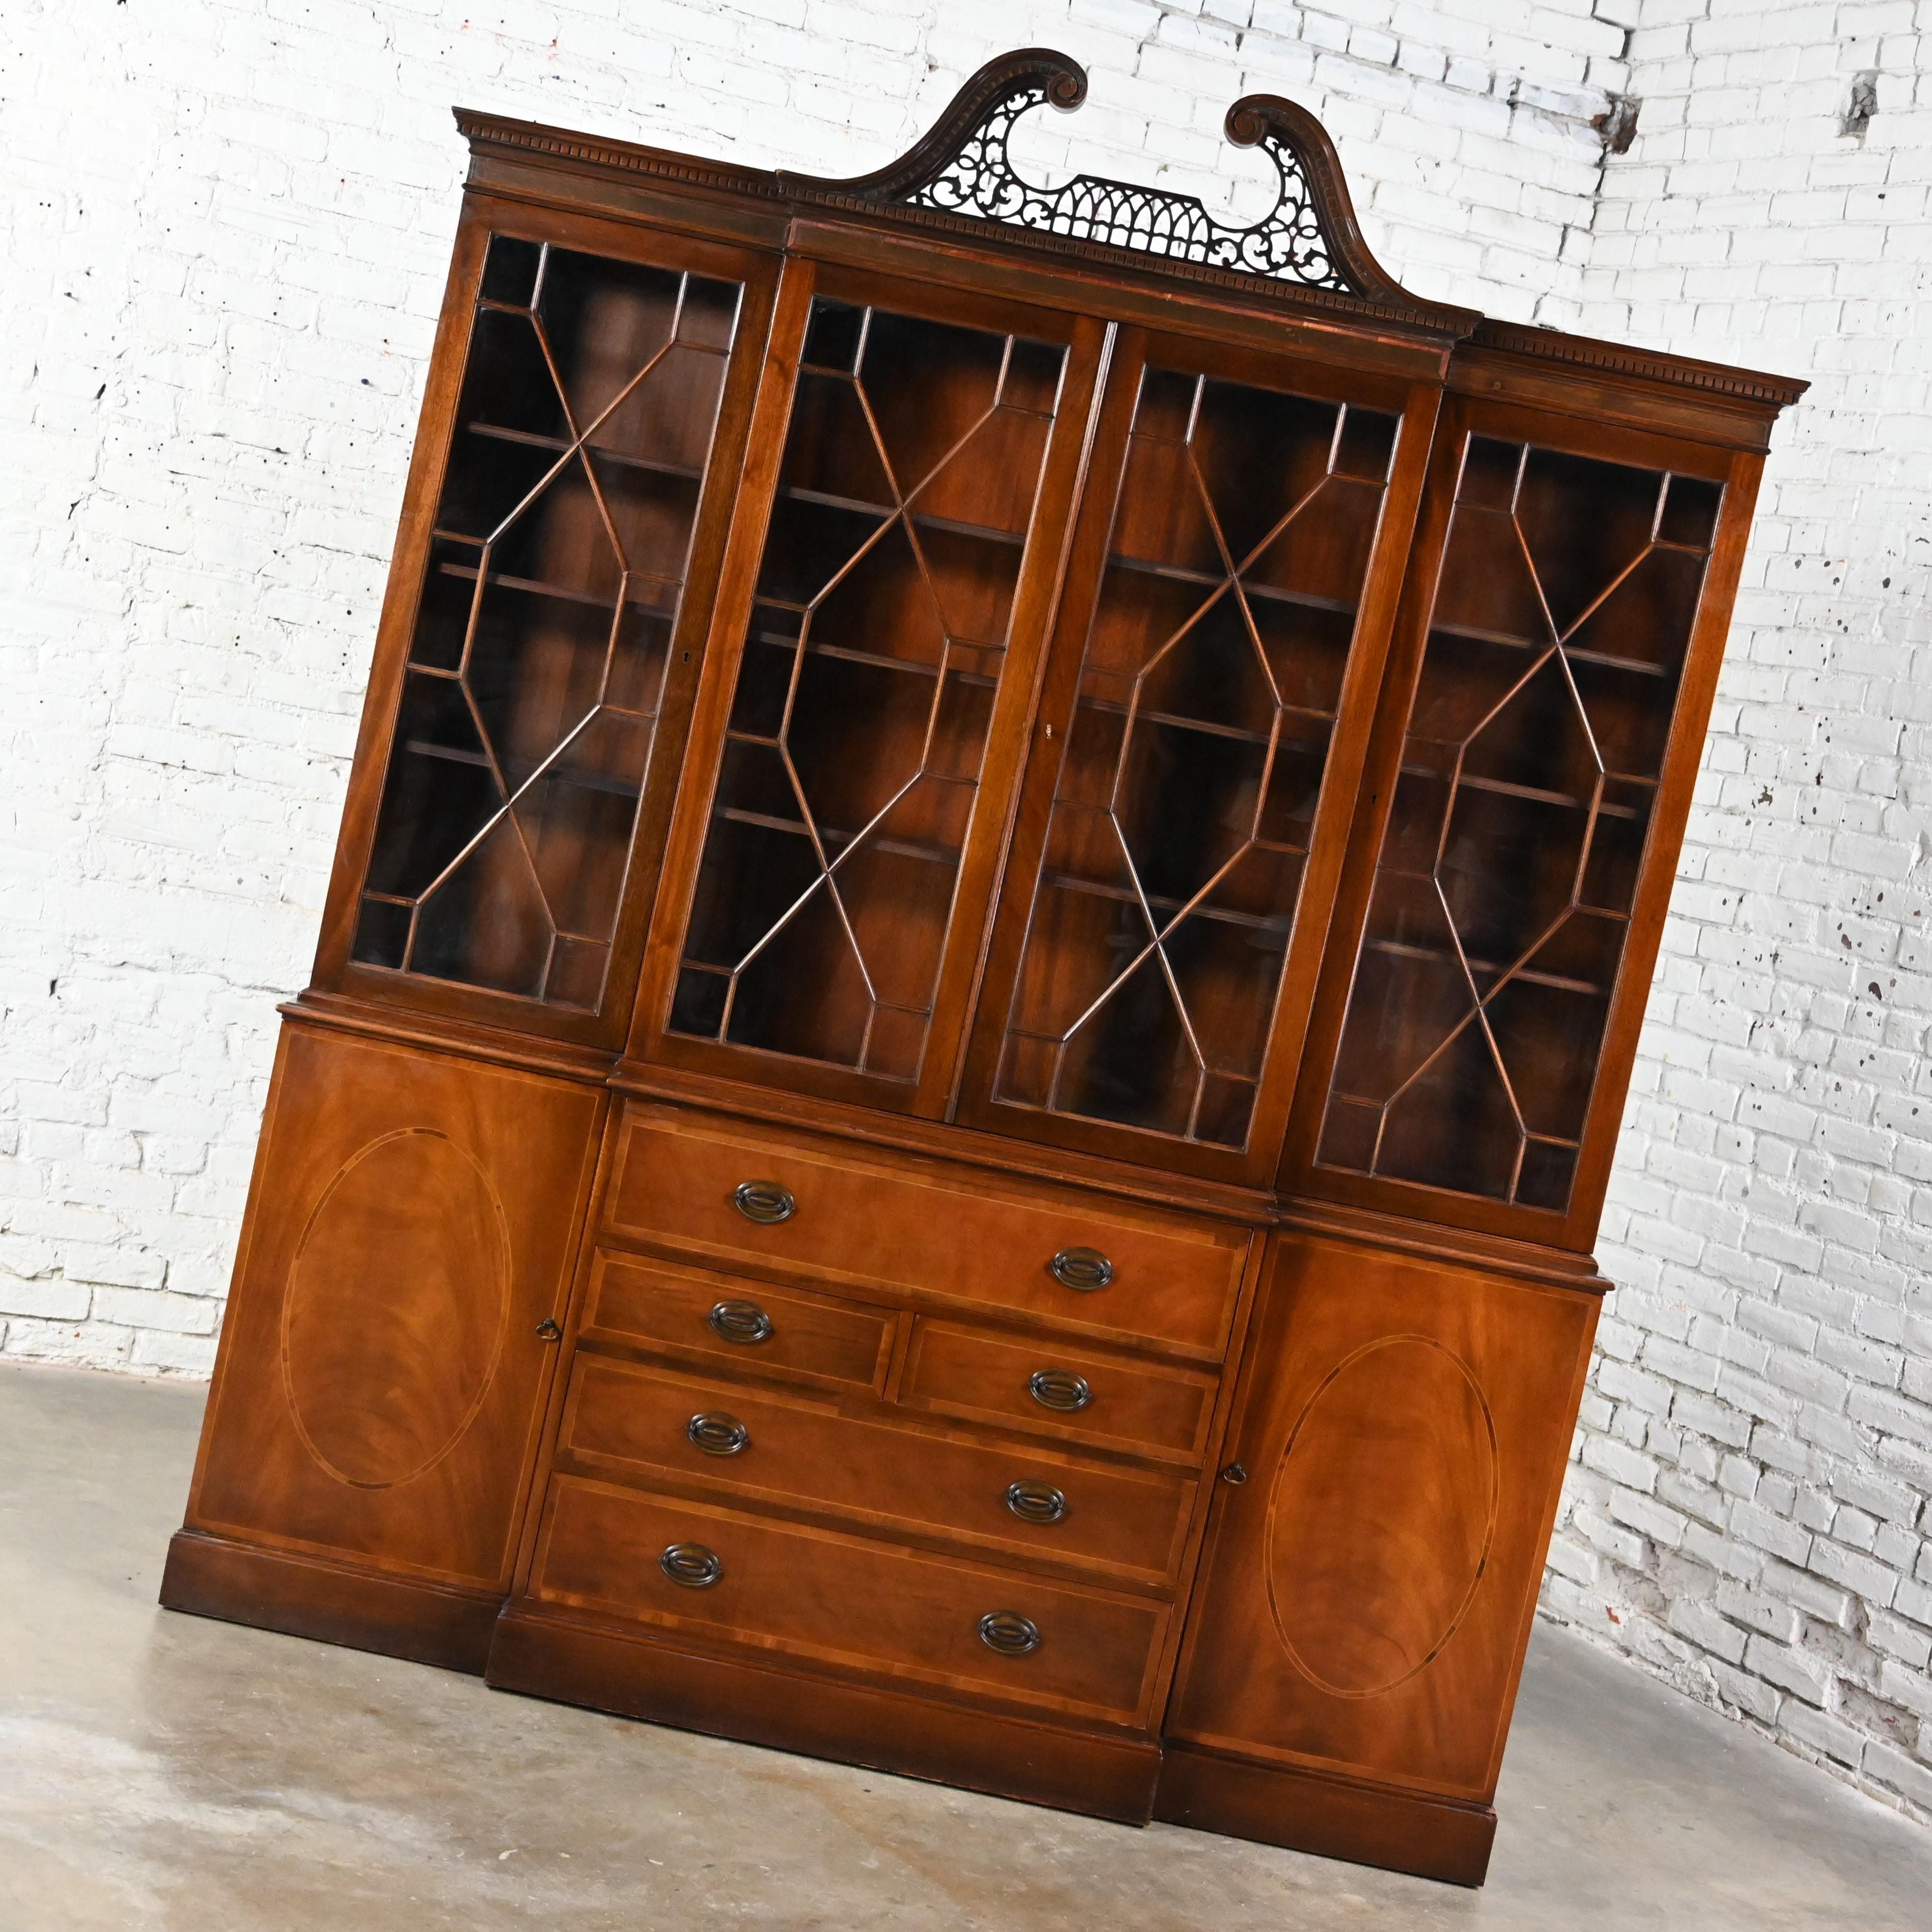 Marvelous Mid-20th Century Chinese Chippendale Baker Furniture mahogany & walnut breakfront secretary china cabinet or bookcase with pierced pediment top, glass door fronts with mullions & true divided lites, Hepplewhite brass shield & bale pulls, &